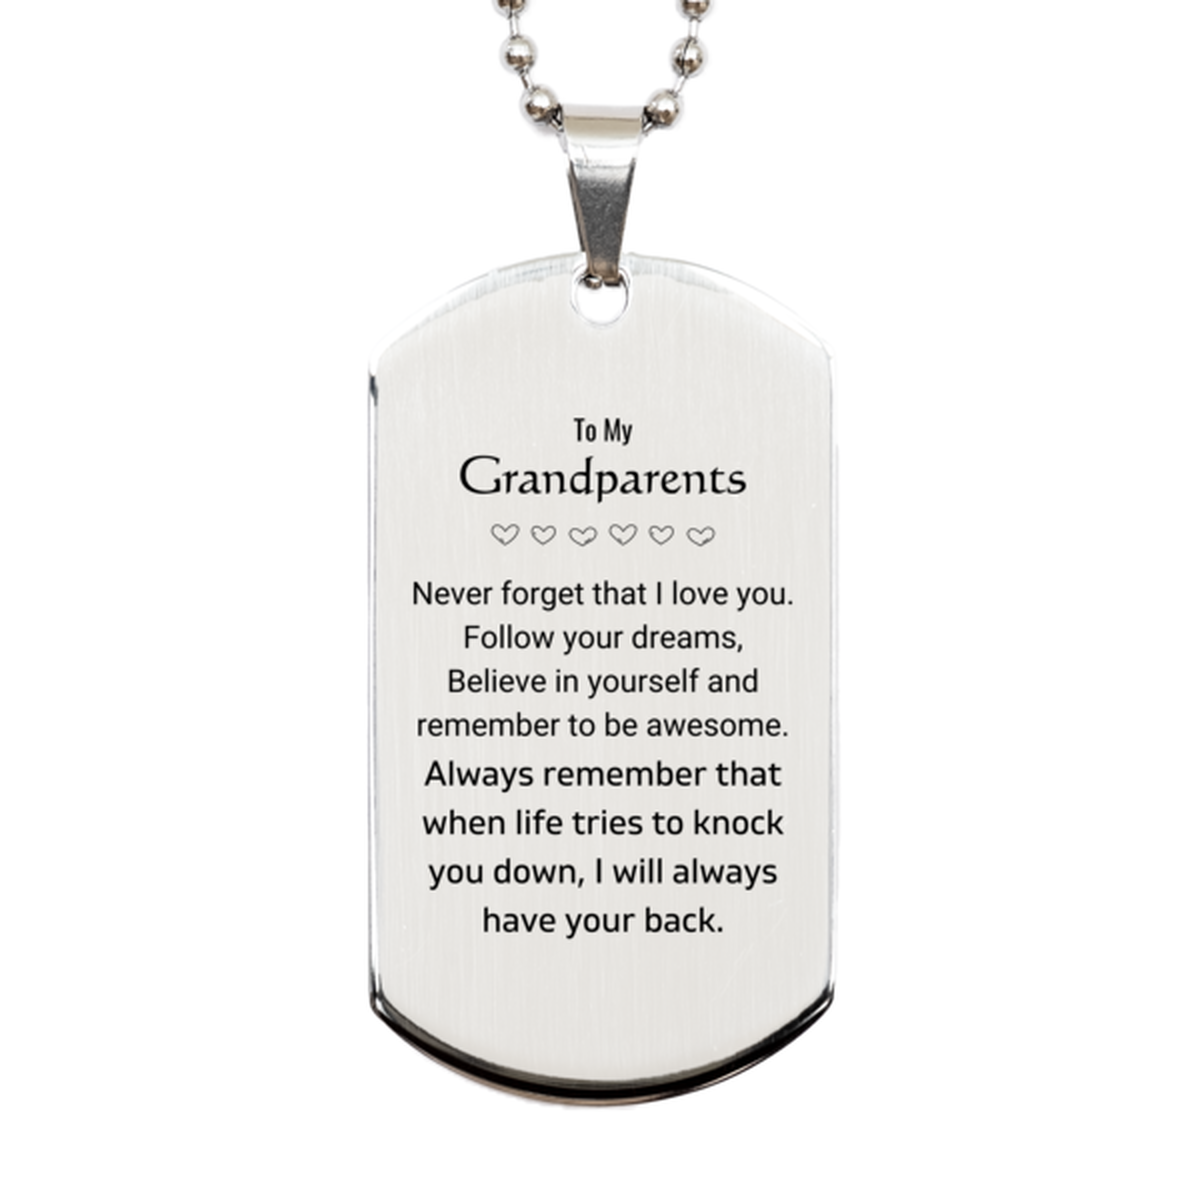 Inspirational Gifts for Grandparents, Follow your dreams, Believe in yourself, Grandparents Silver Dog Tag, Birthday Christmas Unique Gifts For Grandparents